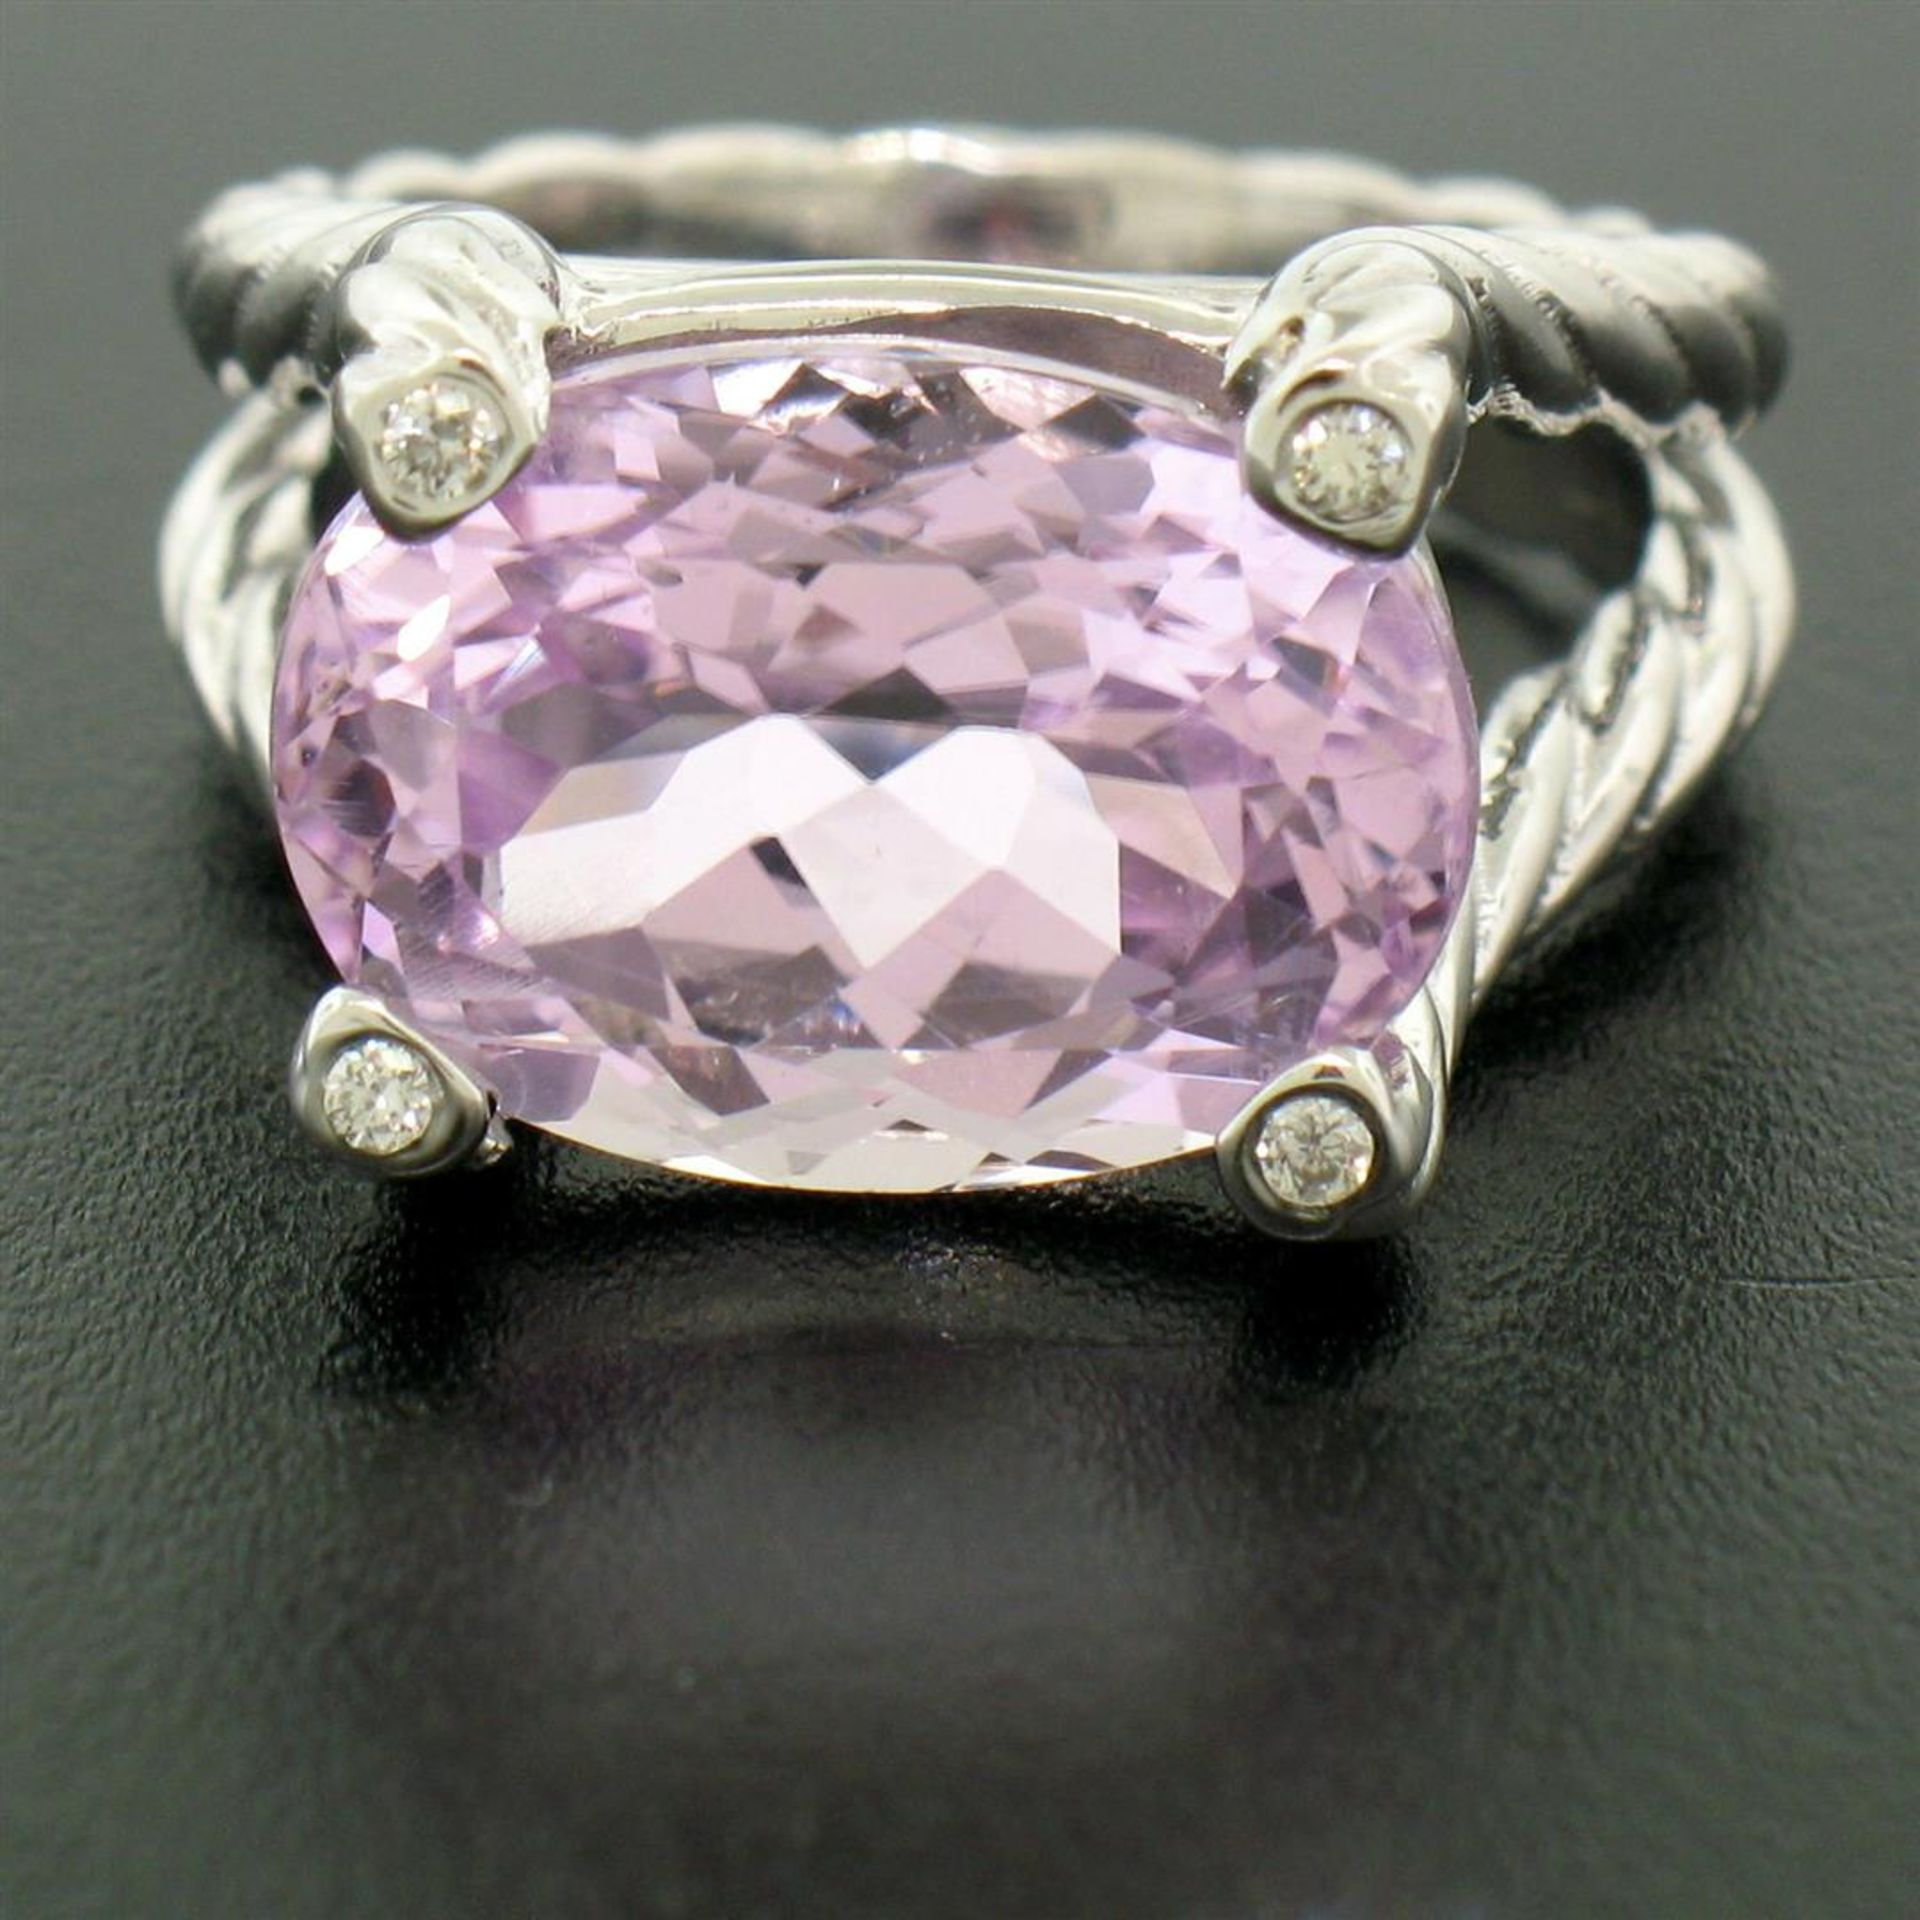 14k White Gold Twisted Cable 8.5 ct Oval Kunzite Solitaire Ring 4 Diamond Accent - Image 6 of 8